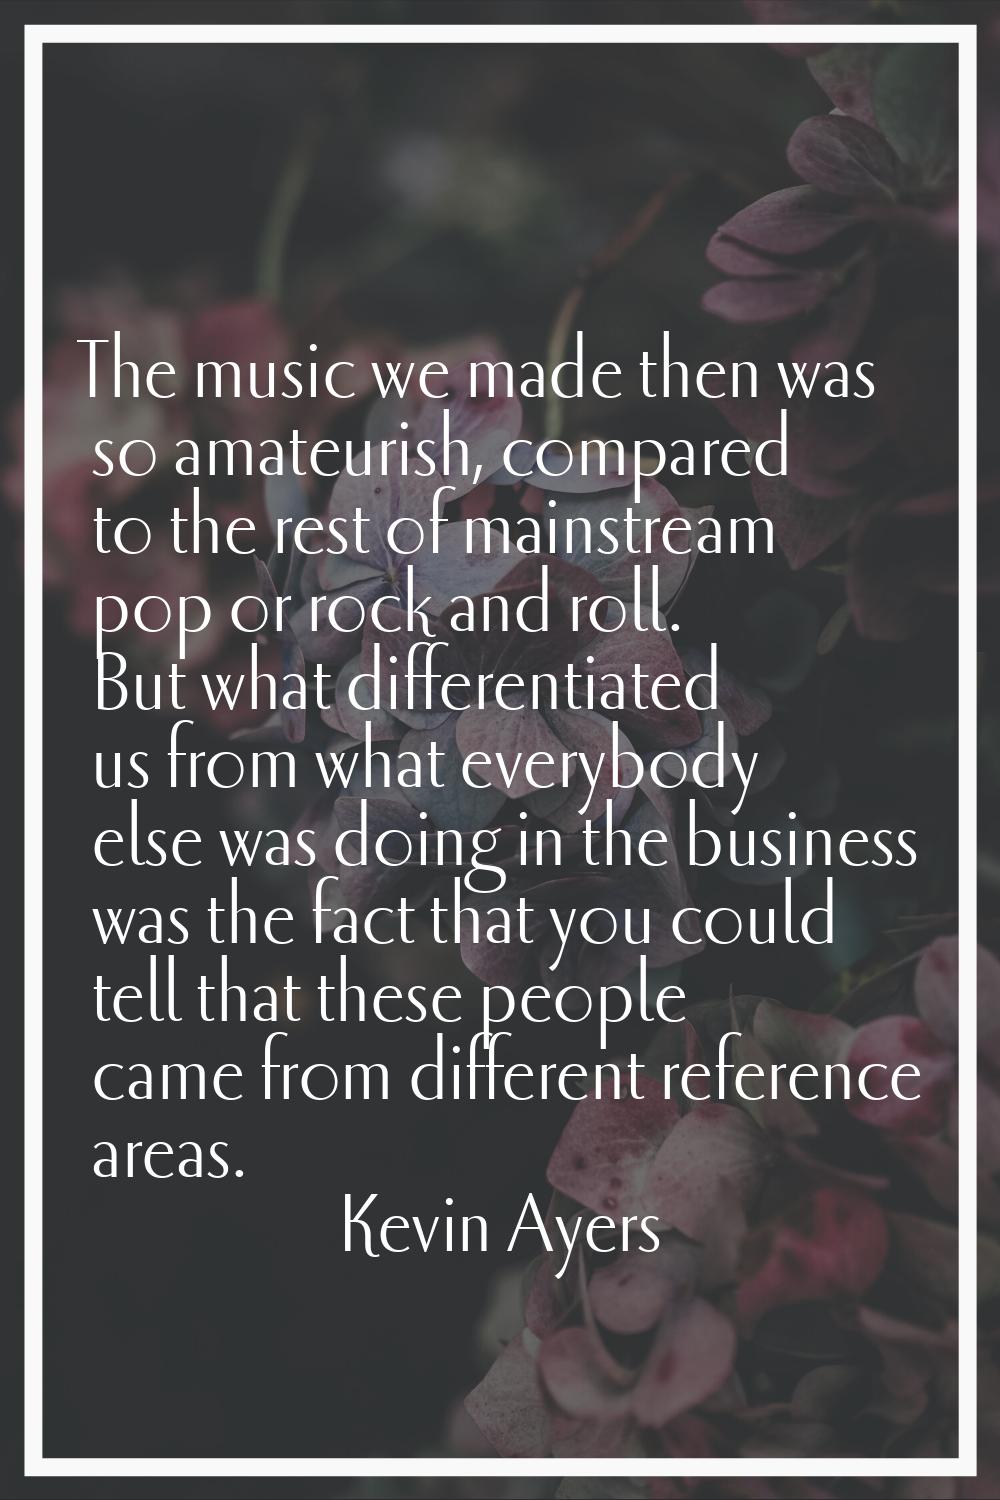 The music we made then was so amateurish, compared to the rest of mainstream pop or rock and roll. 